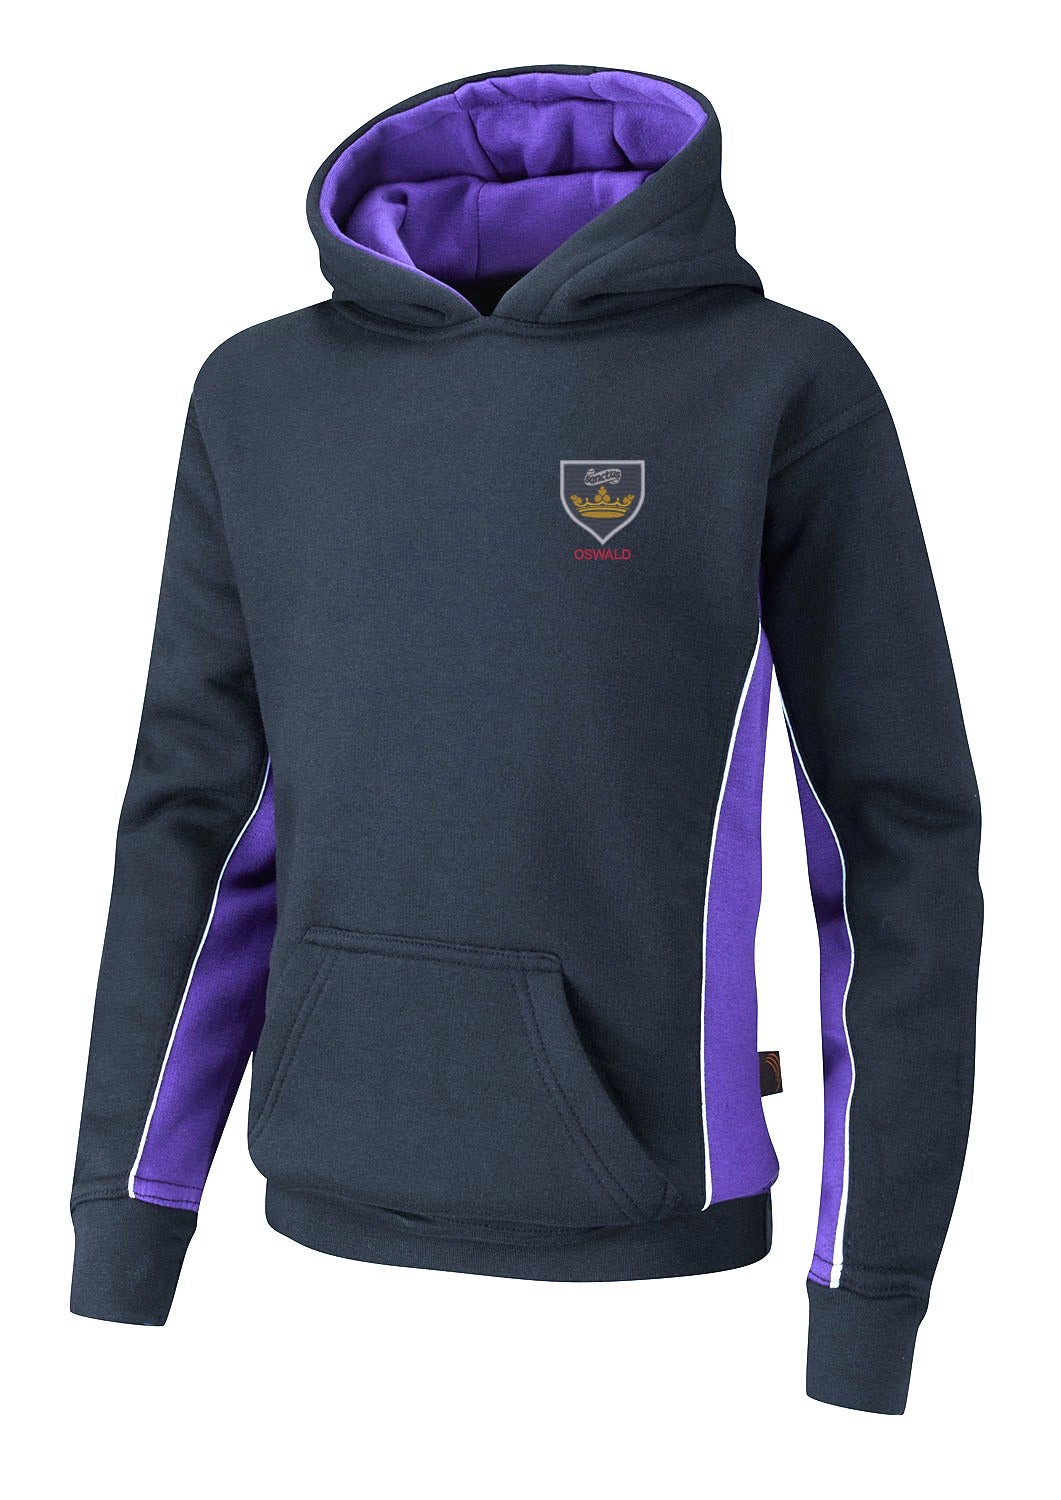 All Saints Navy, Purple And White Sports Hoodie House Oswald